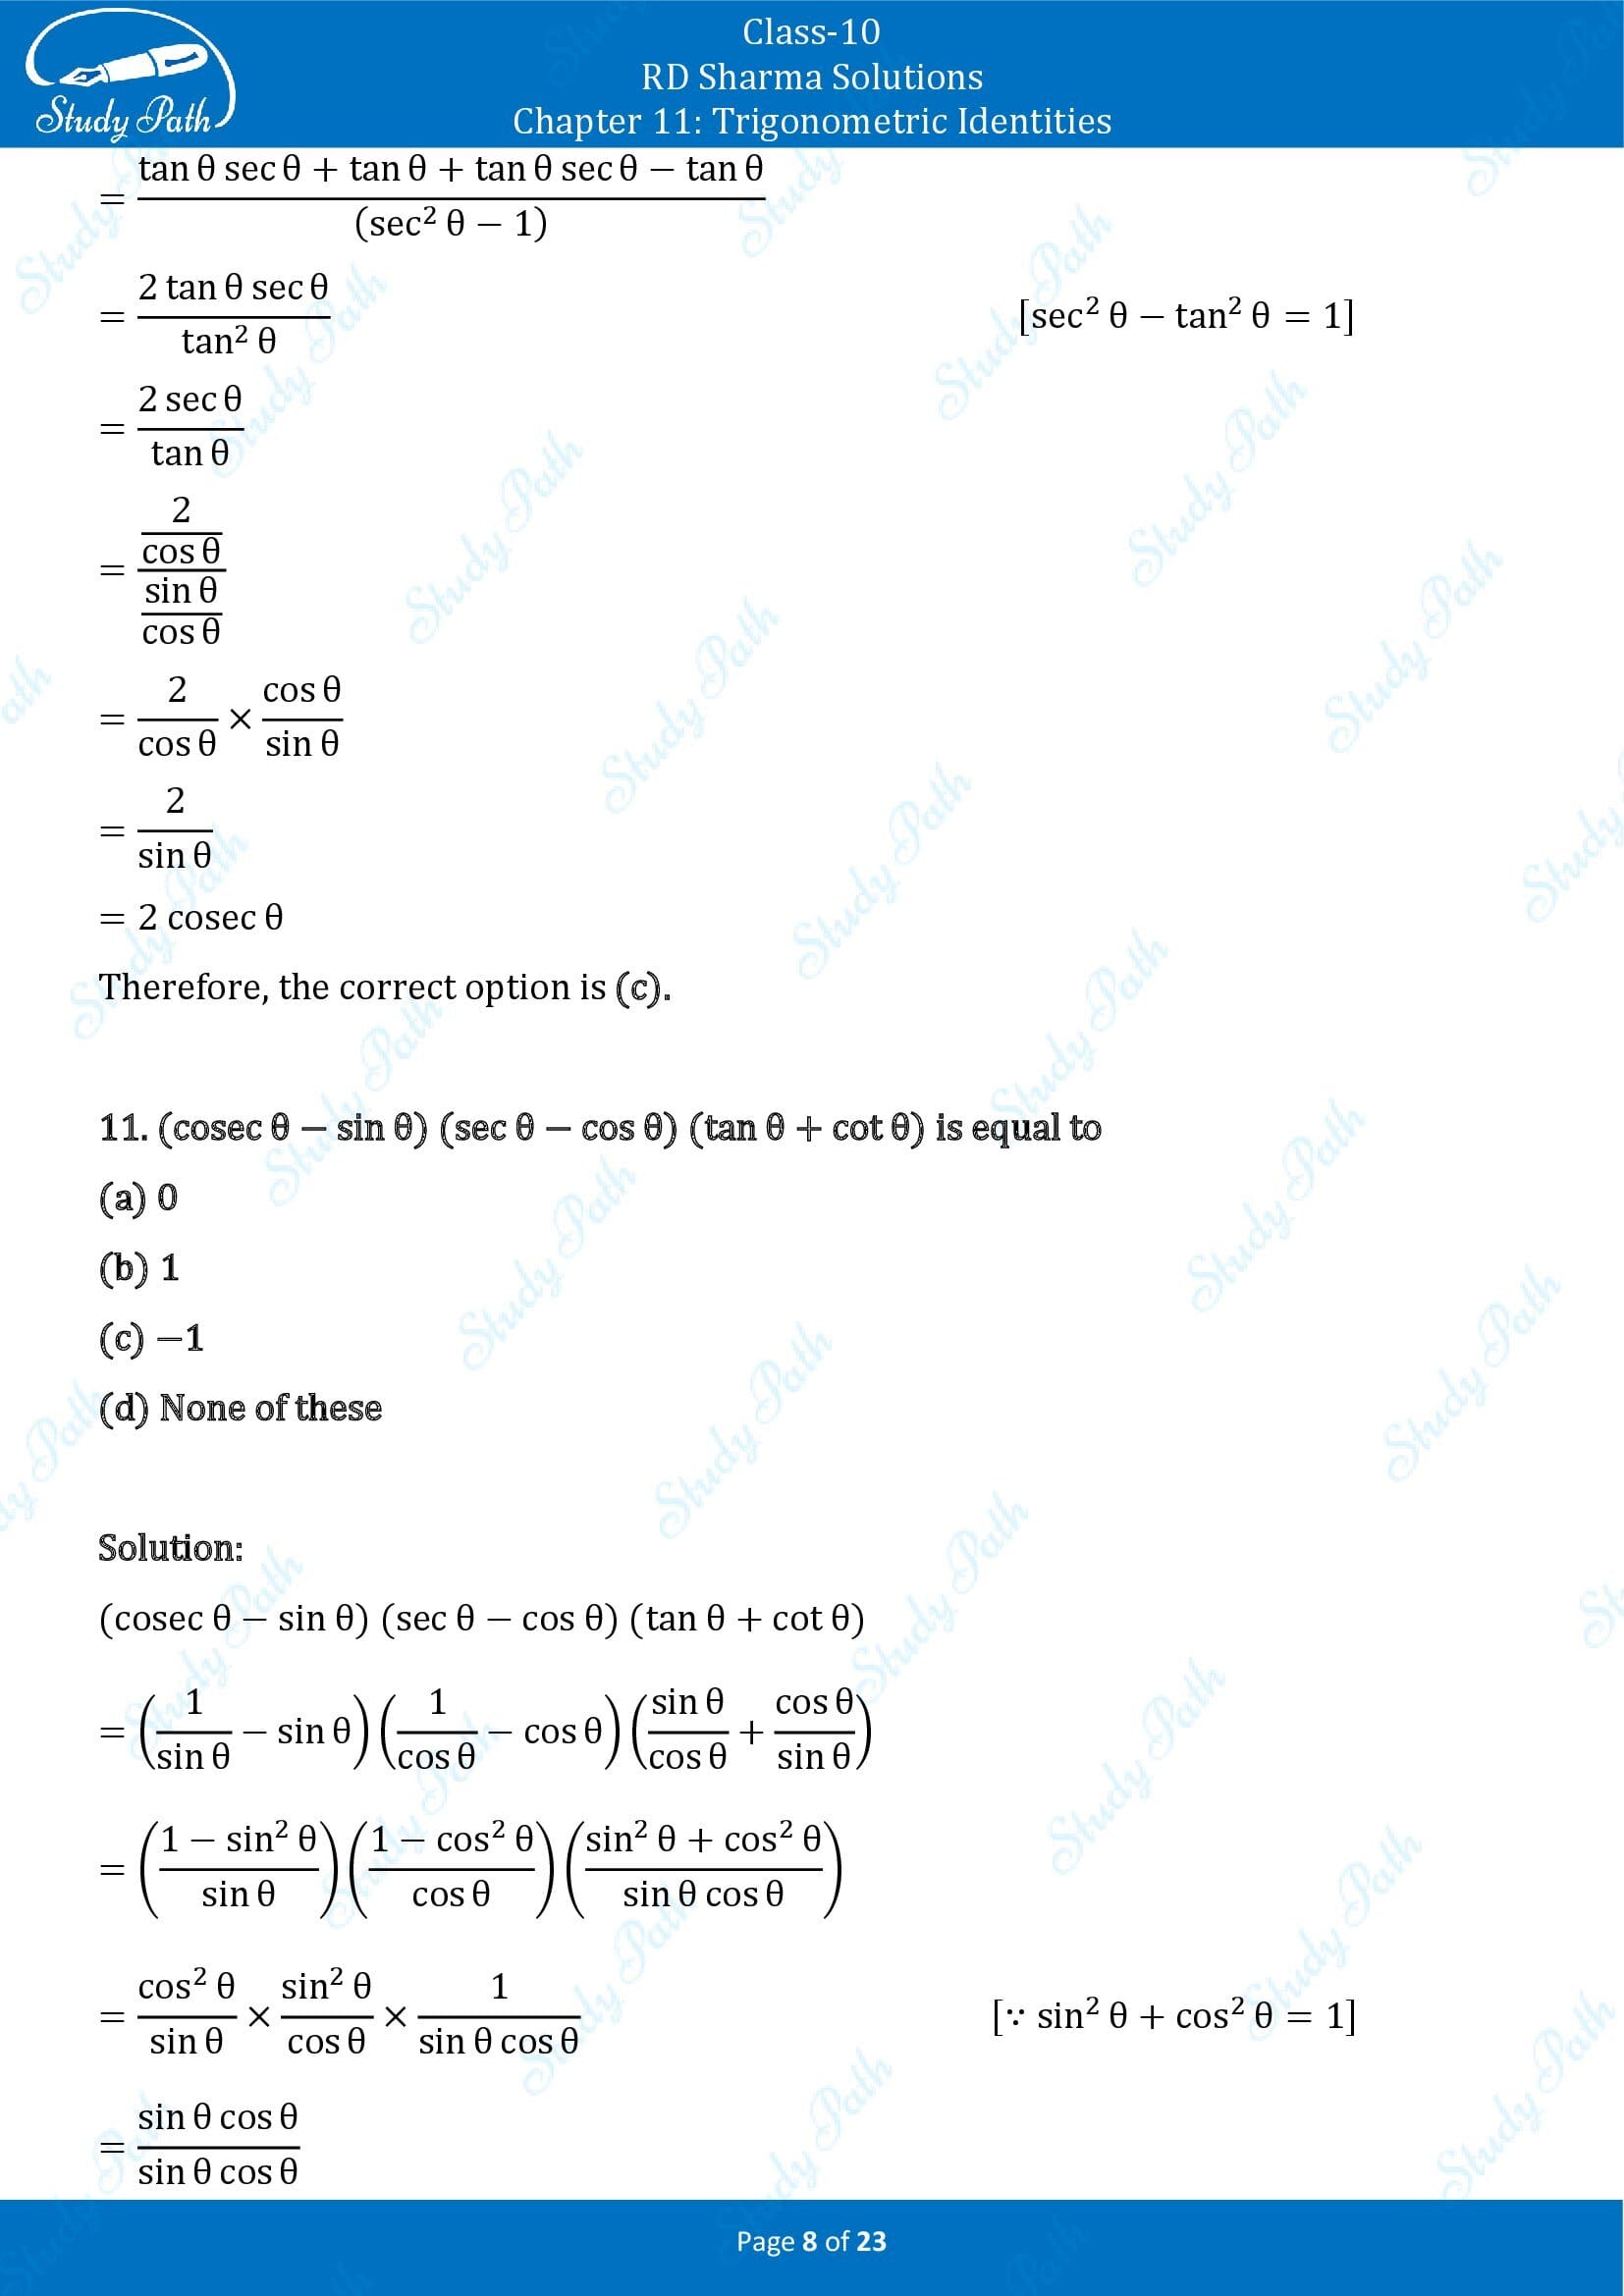 RD Sharma Solutions Class 10 Chapter 11 Trigonometric Identities Multiple Choice Questions MCQs 00008